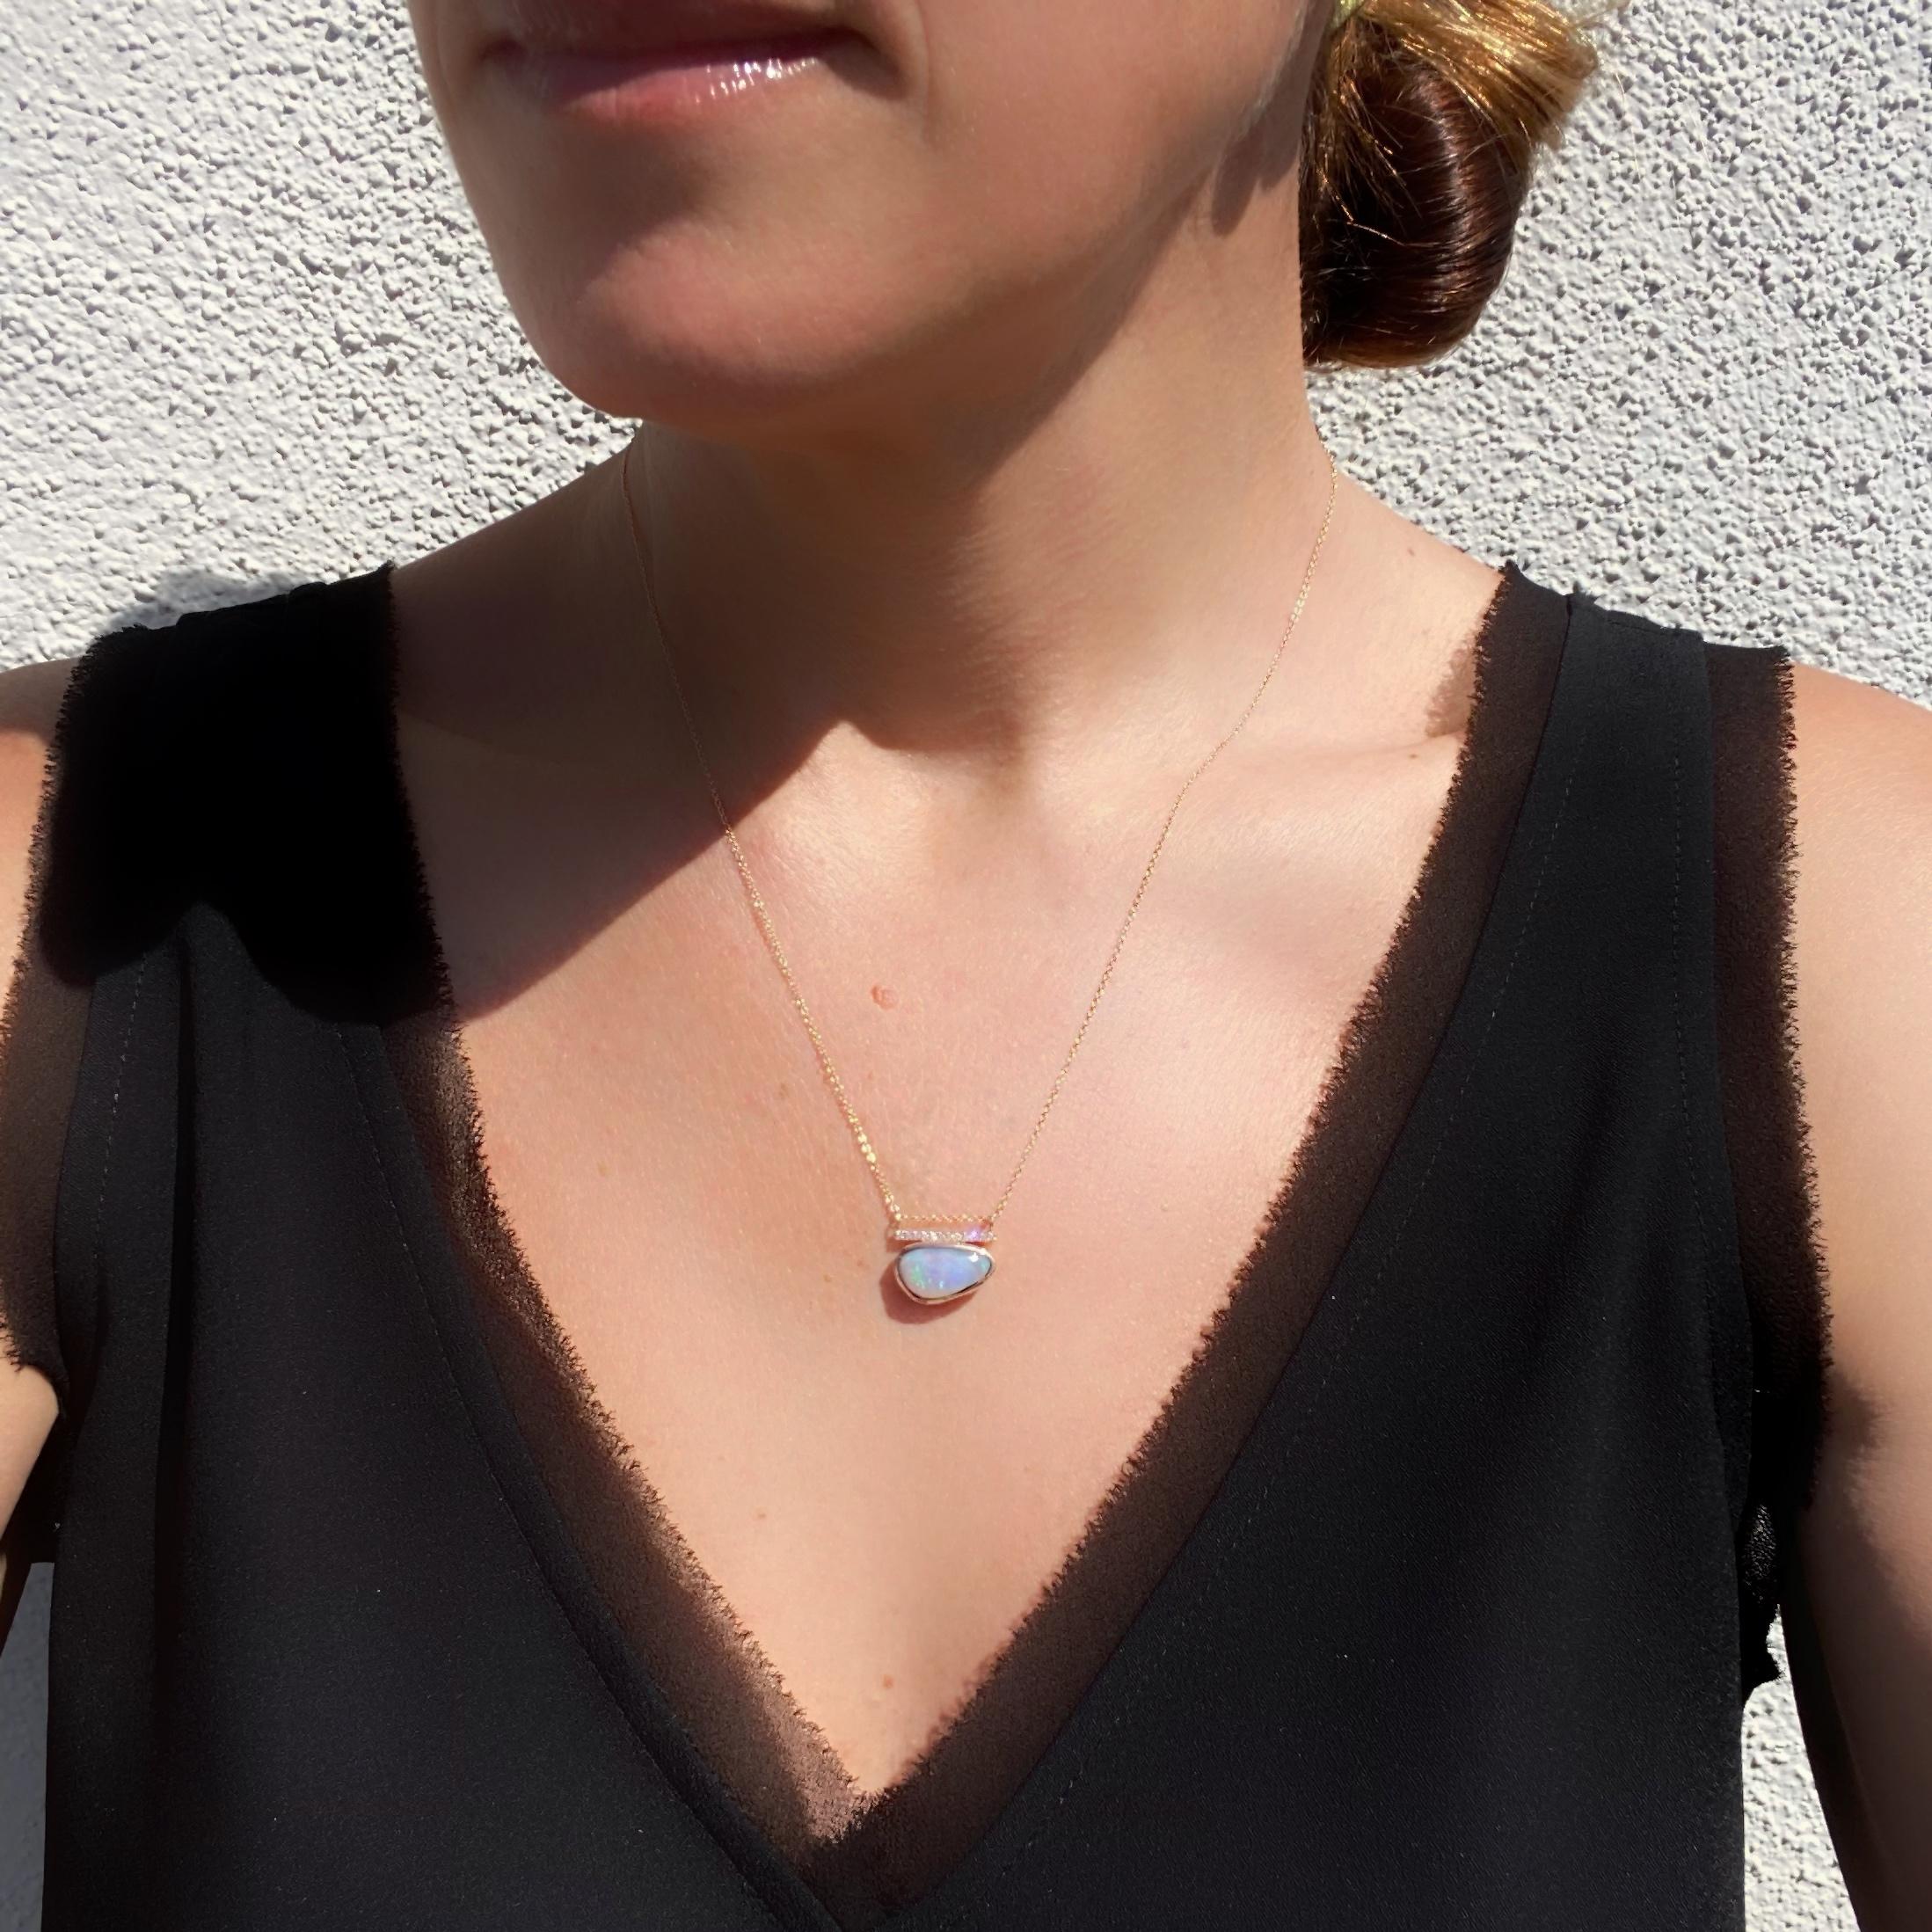 Head in the Clouds Rose Gold Opal Necklace No. 15 with Diamonds by NIXIN Jewelry For Sale 3